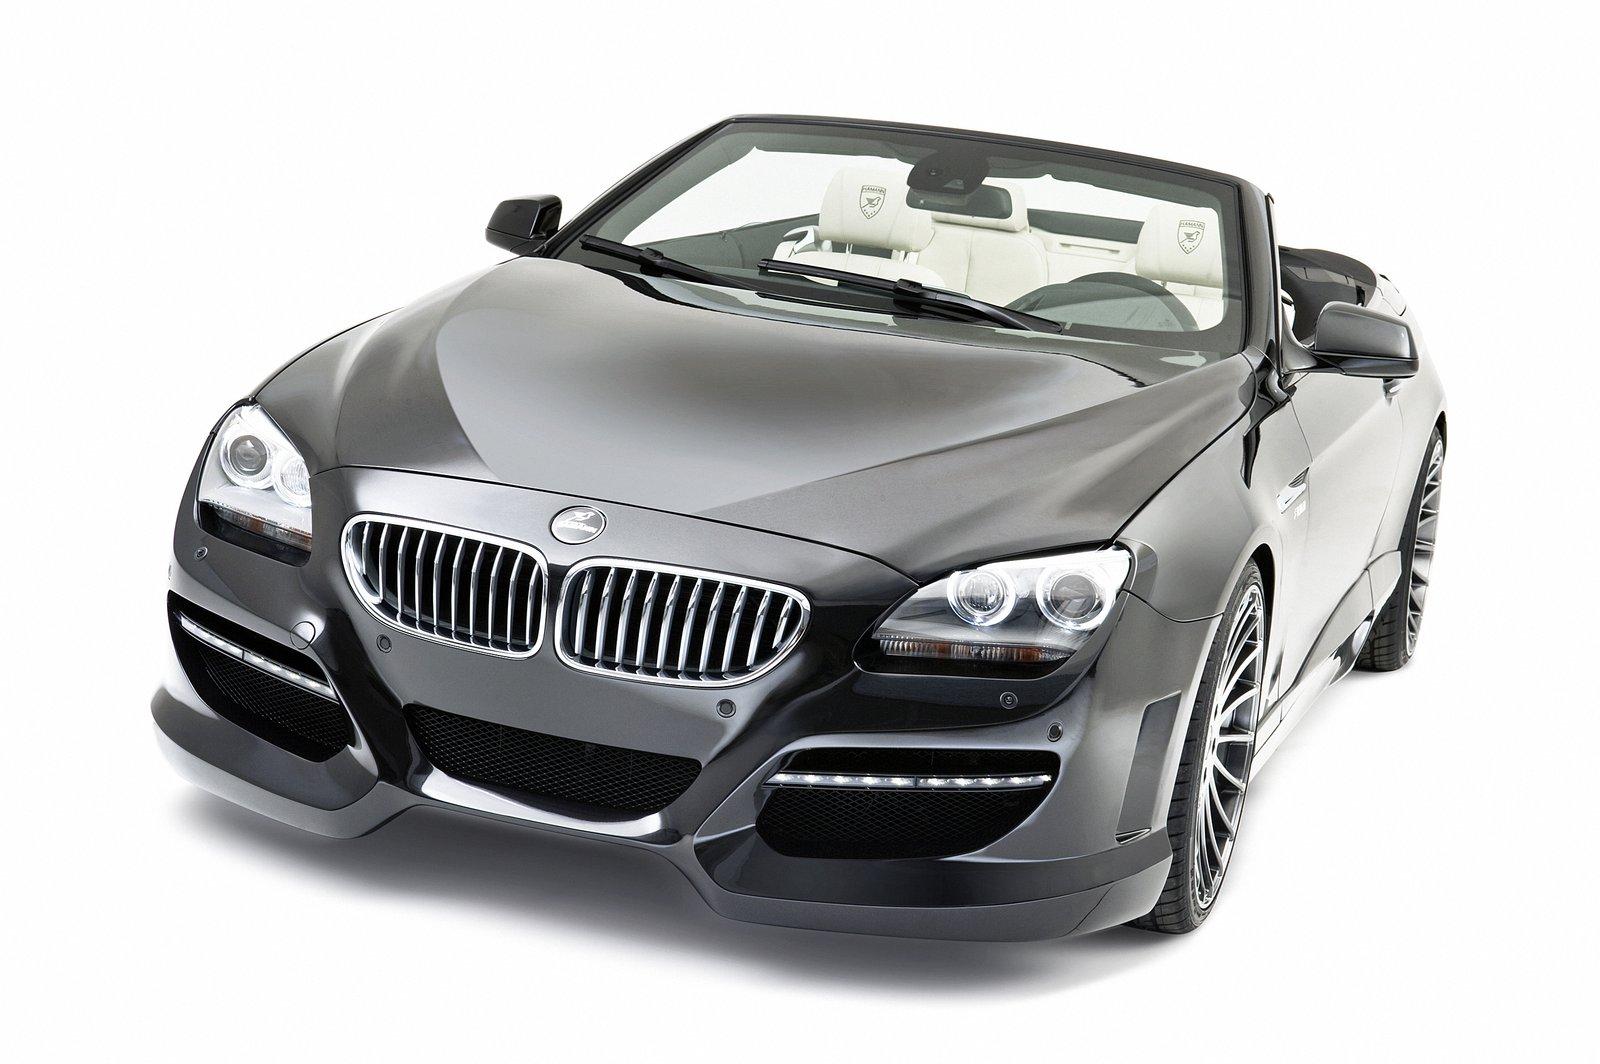 2012 BMW 650i Convertible by Hamann